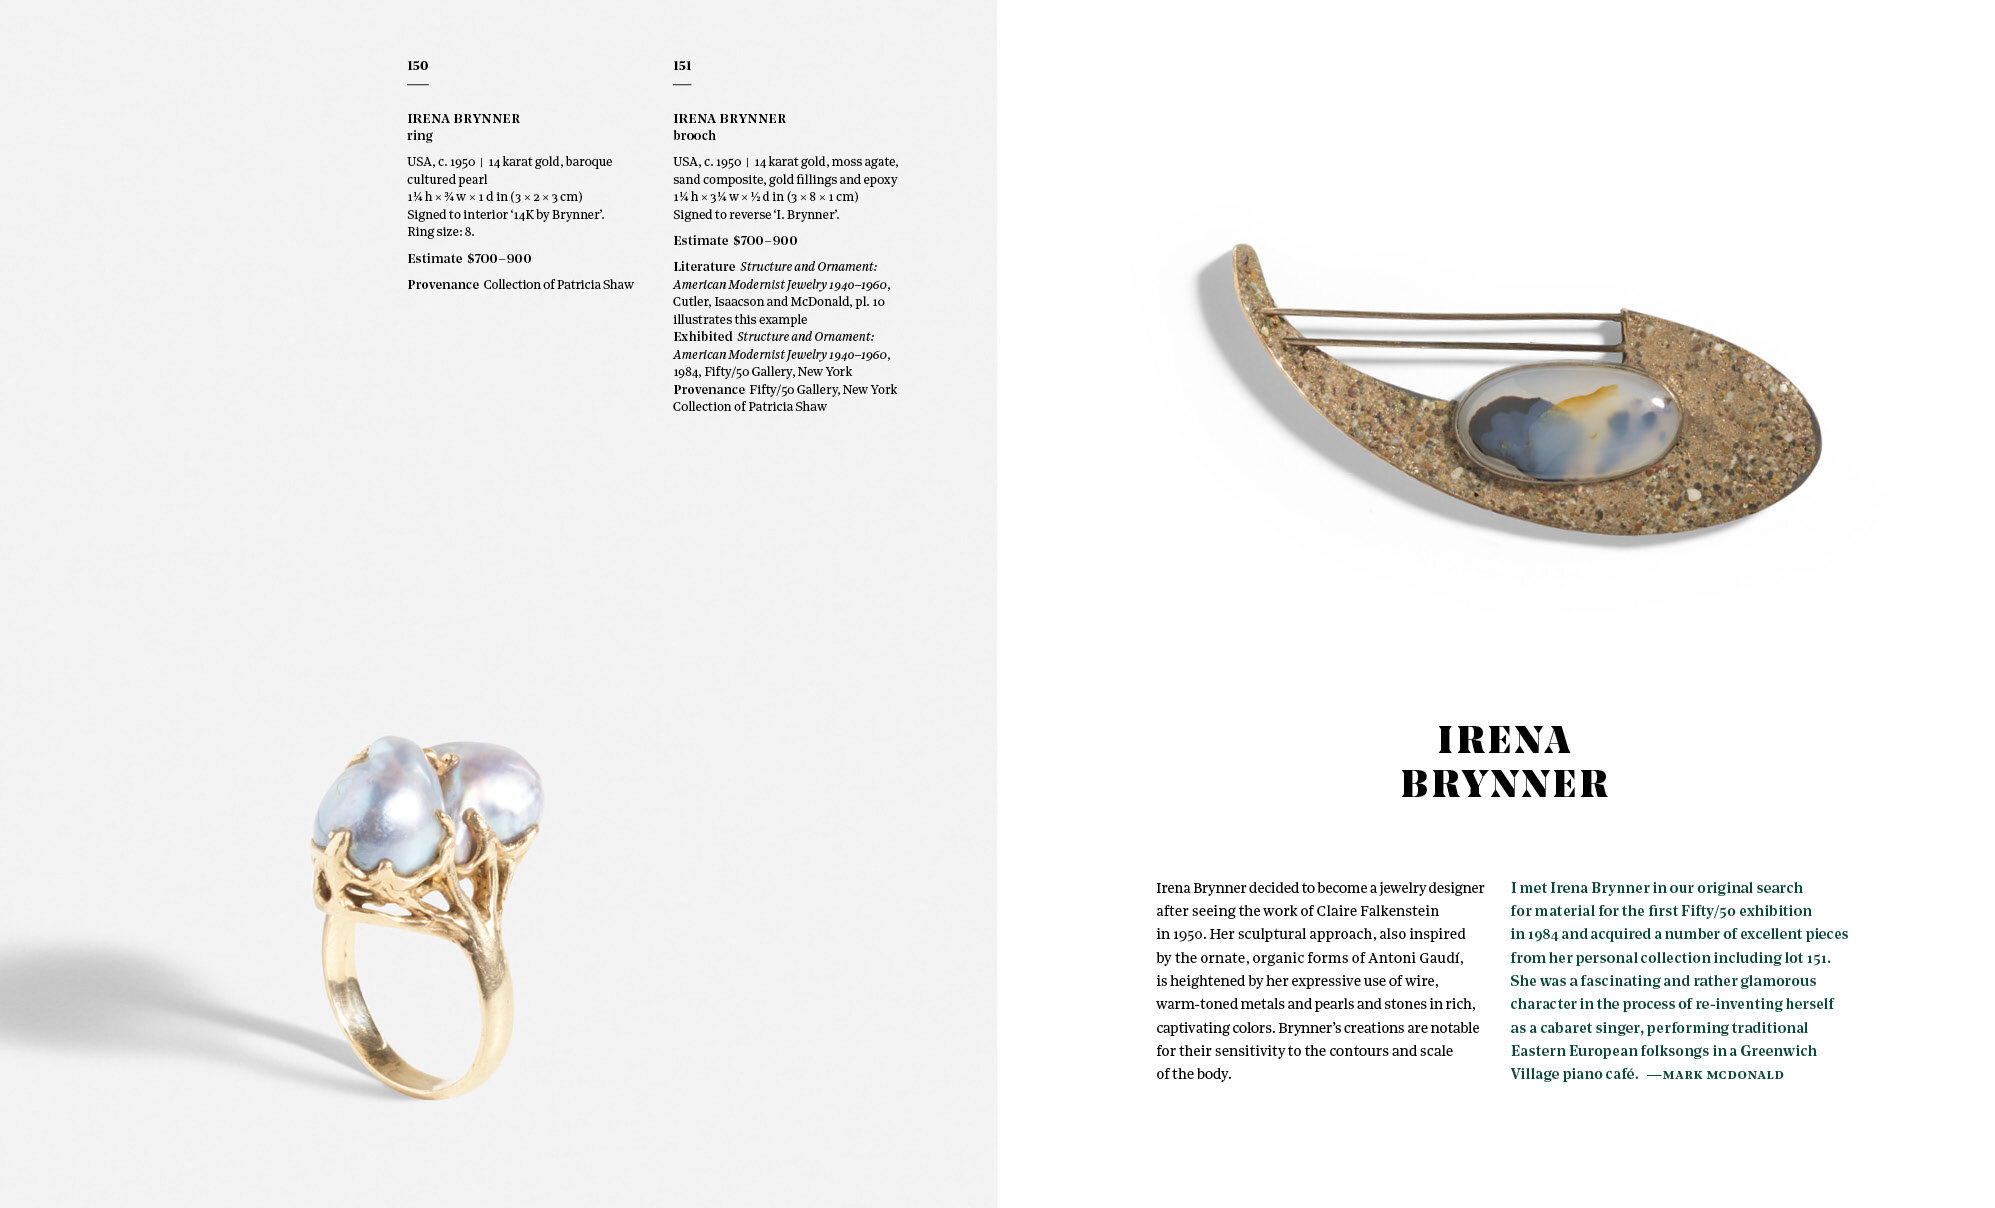 View or download the Structure & Ornament: Studio Jewelry  to